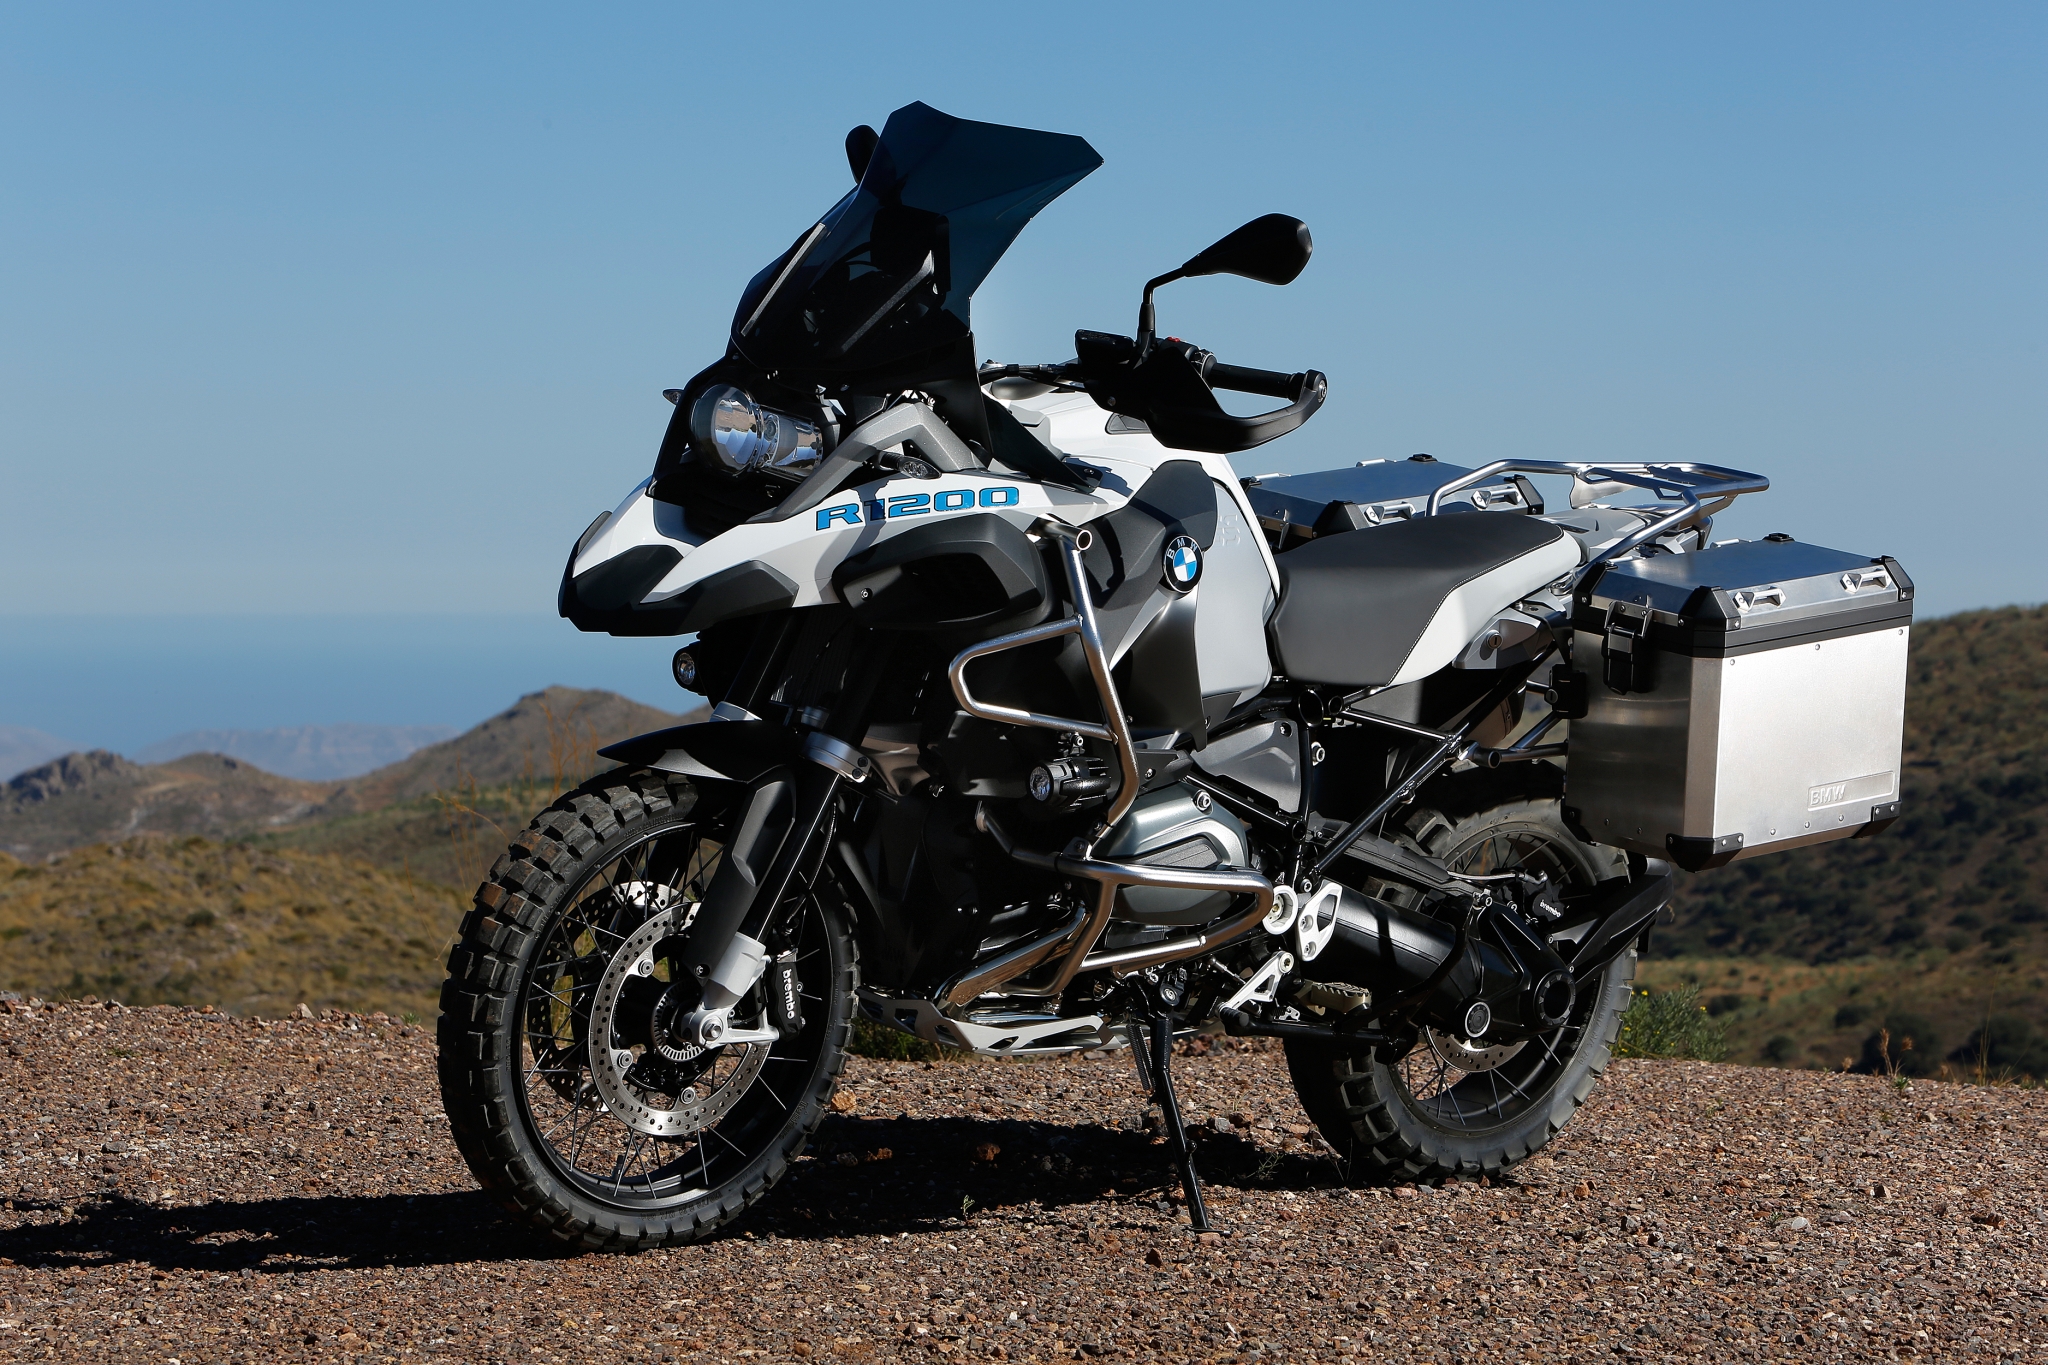 100+ Pictures of the 2014 BMW R1200GS Adventure